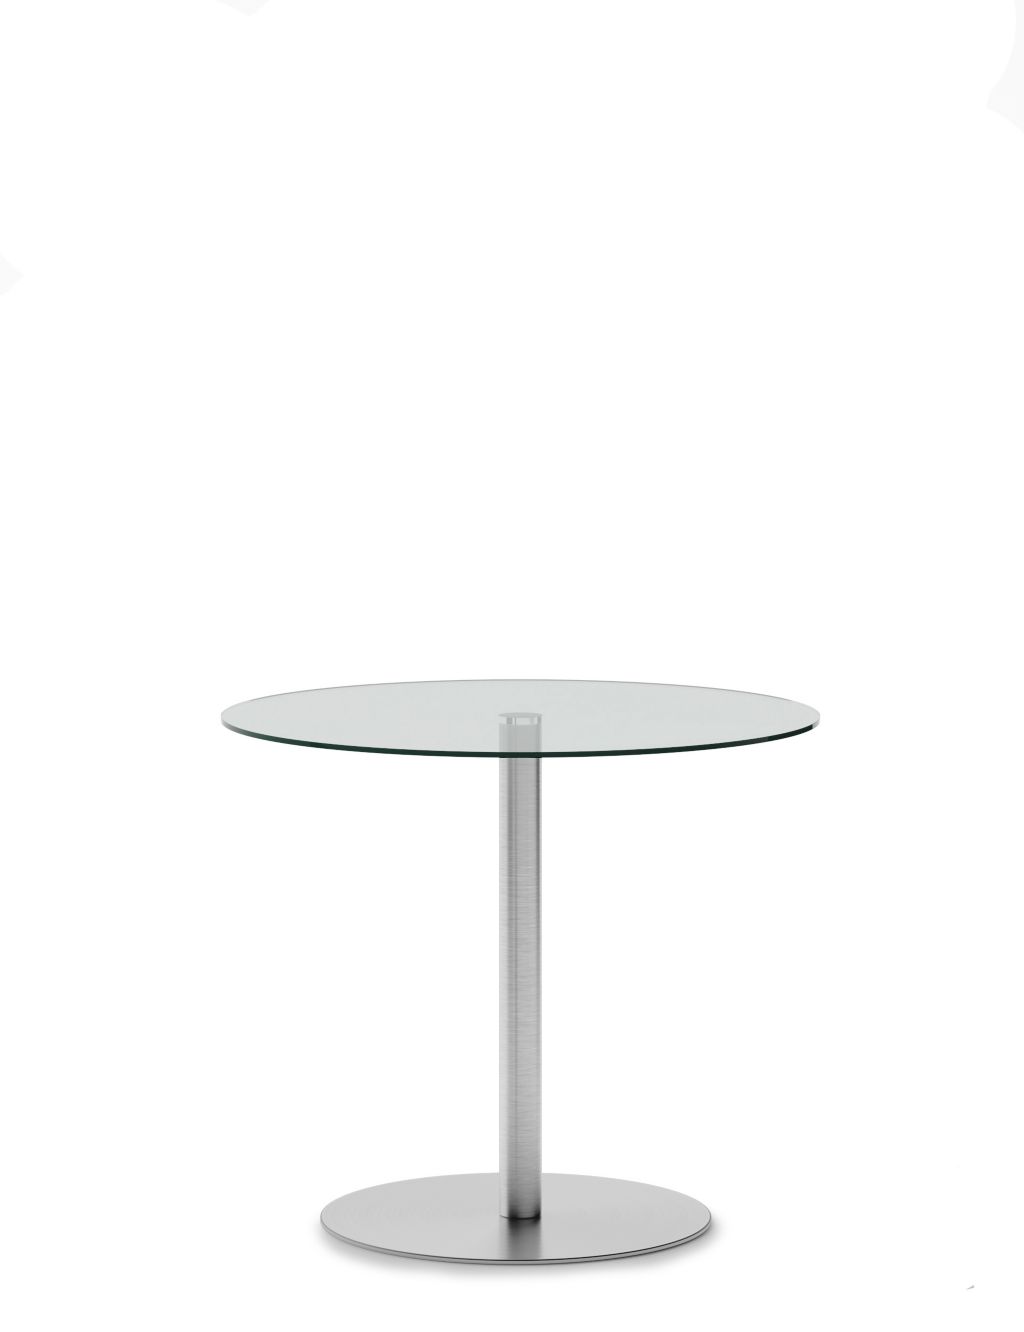 Huxley 4 Seater Pedestal Dining Table